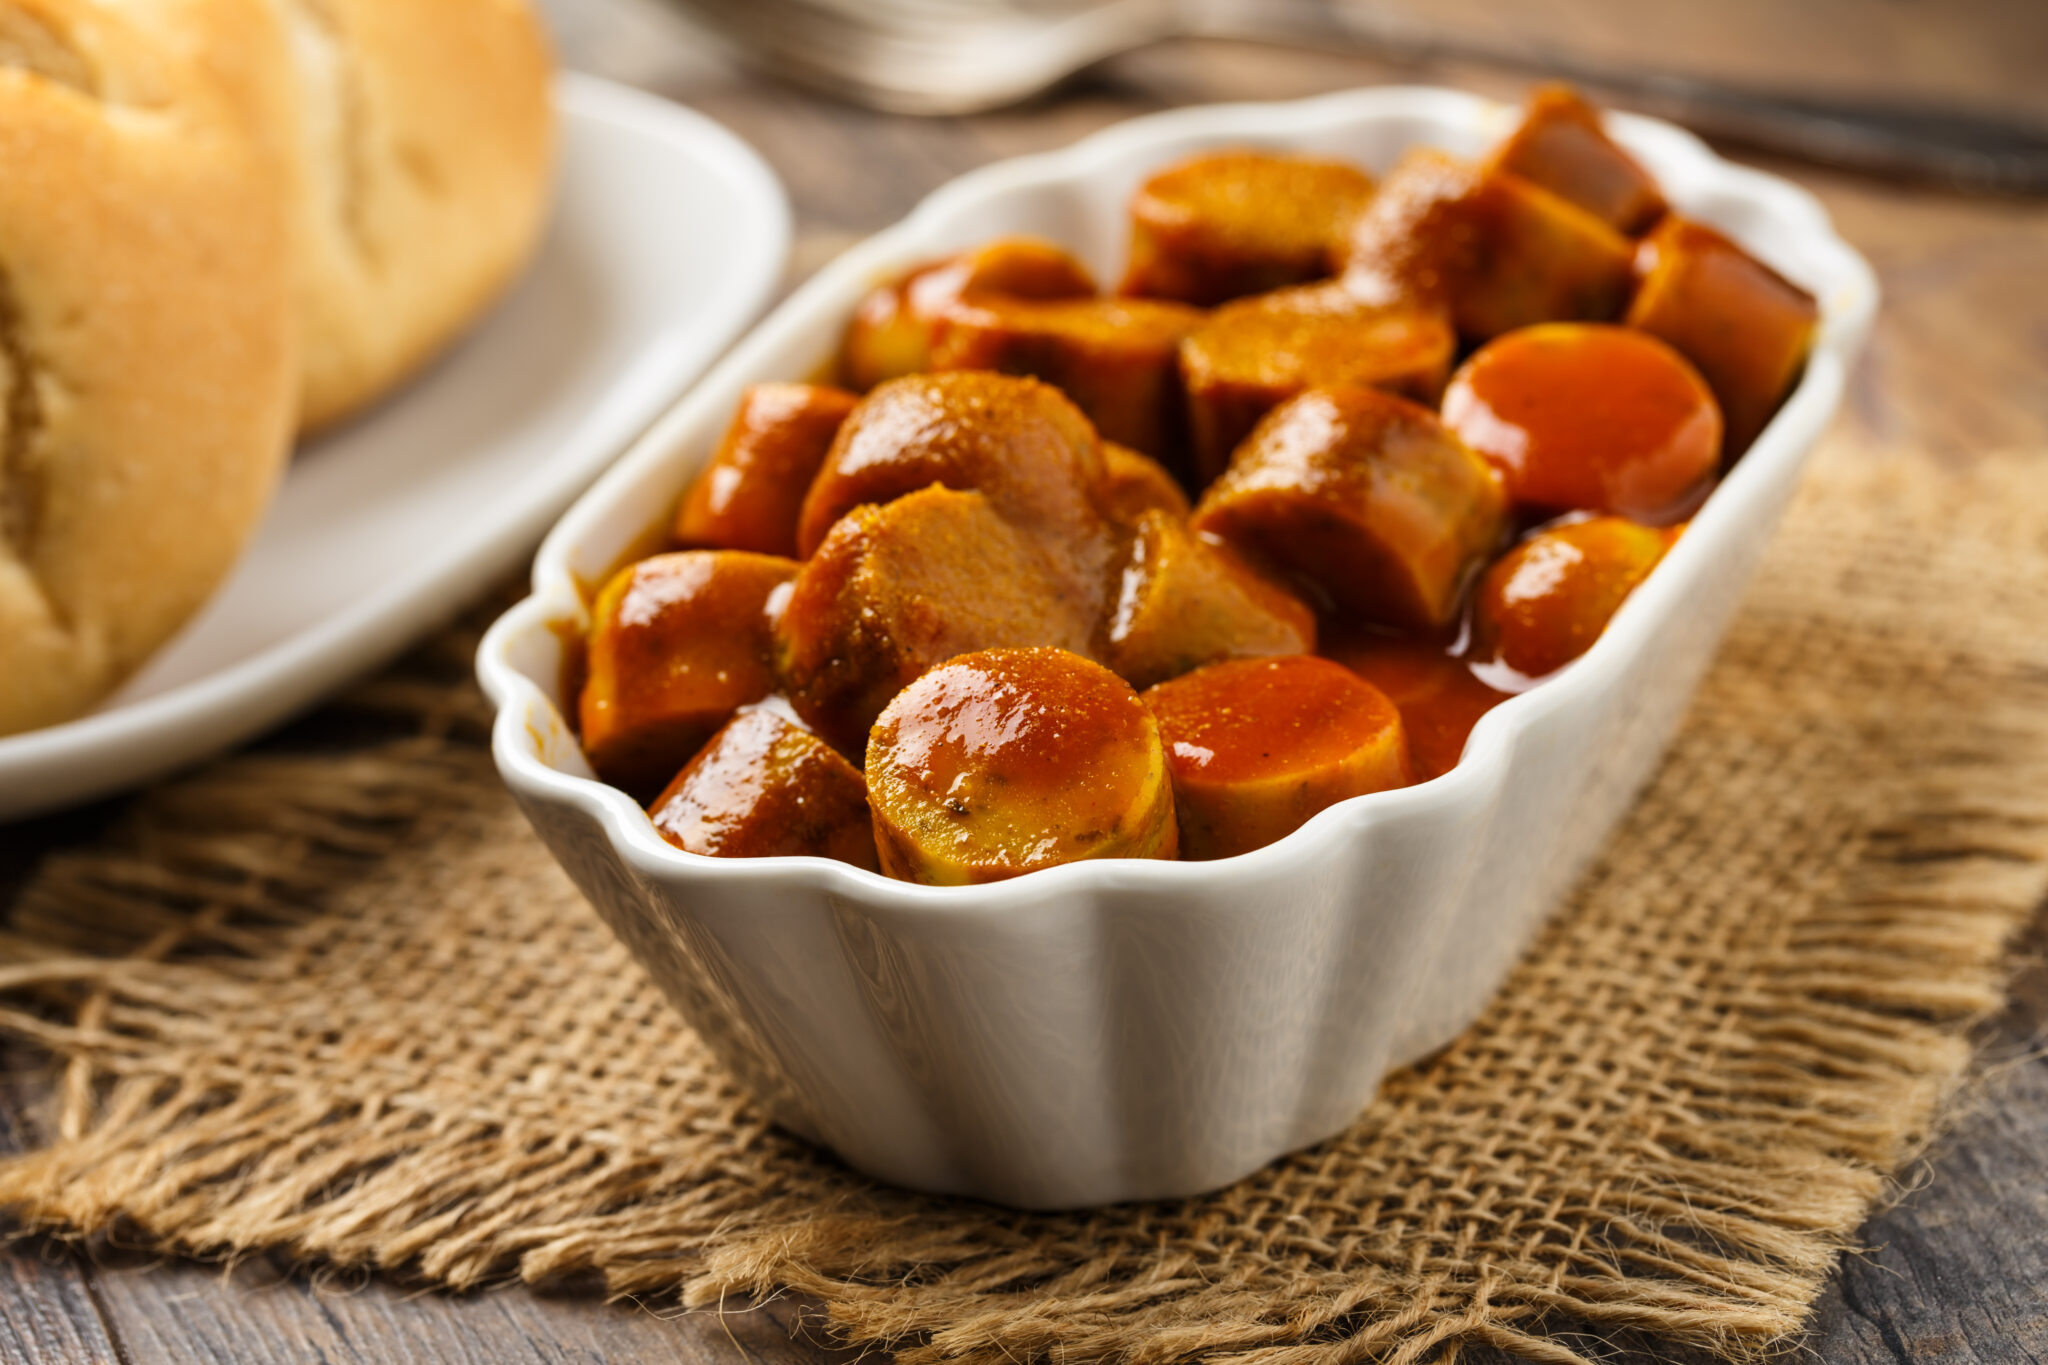 German,Currywurst,-,Pieces,Of,Curried,Sausage